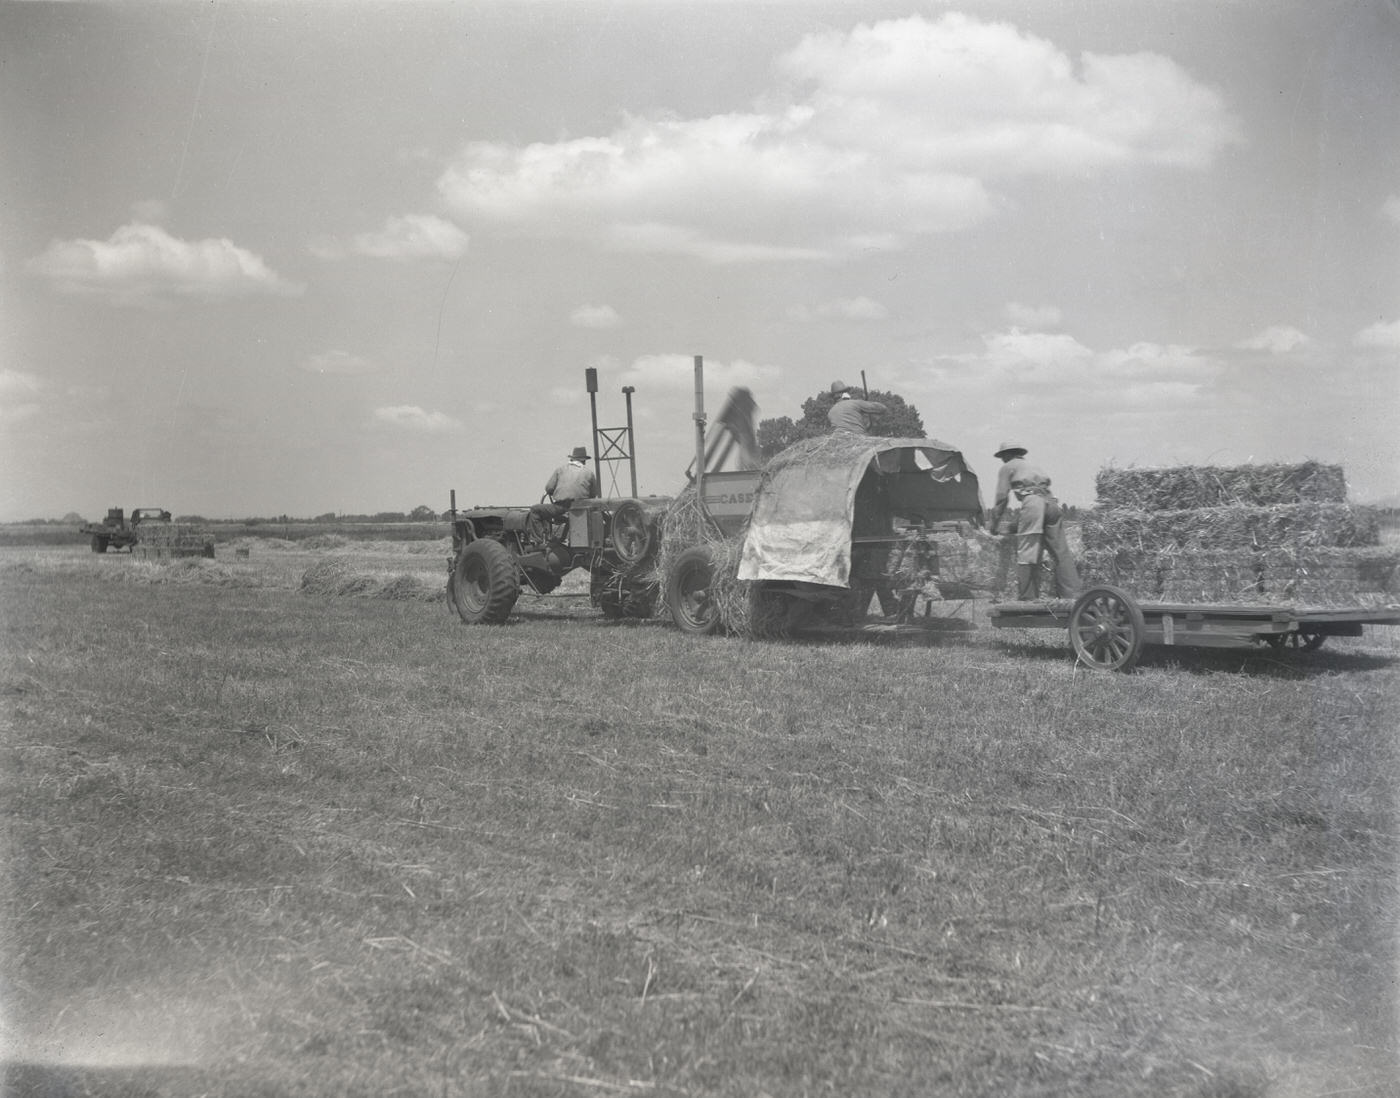 Tractor Pulling a Trailer Filled with Hay, 1943